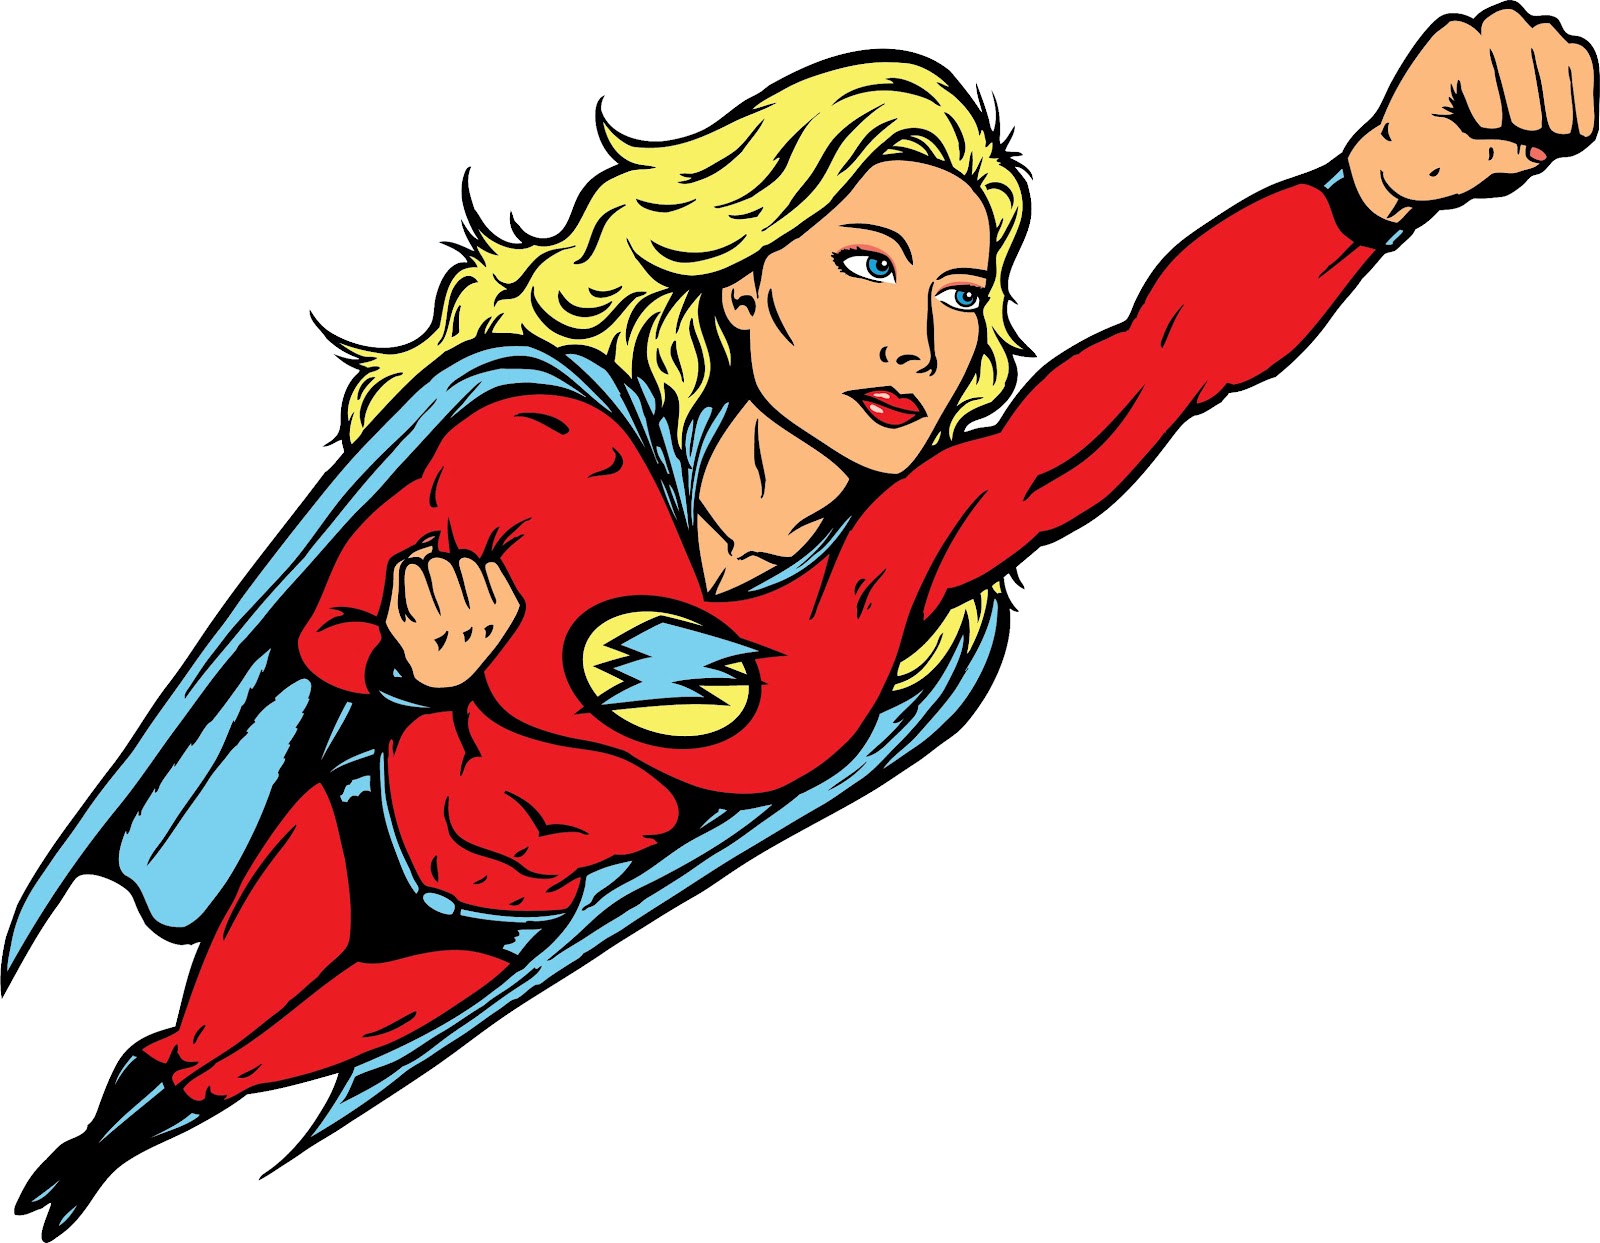 Superwoman: Are you always stressed?